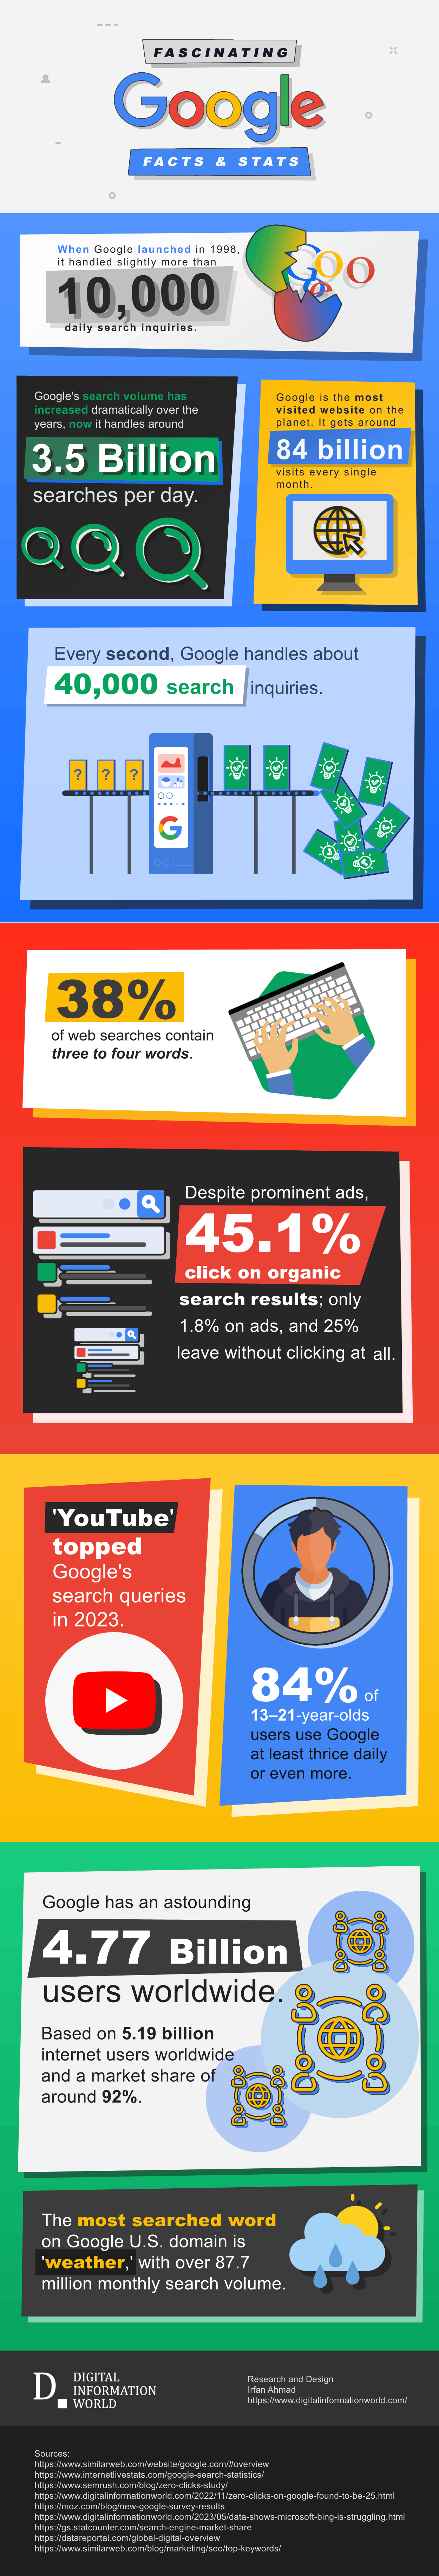 Top Google Search Stats: A Visual Snapshot - infographic